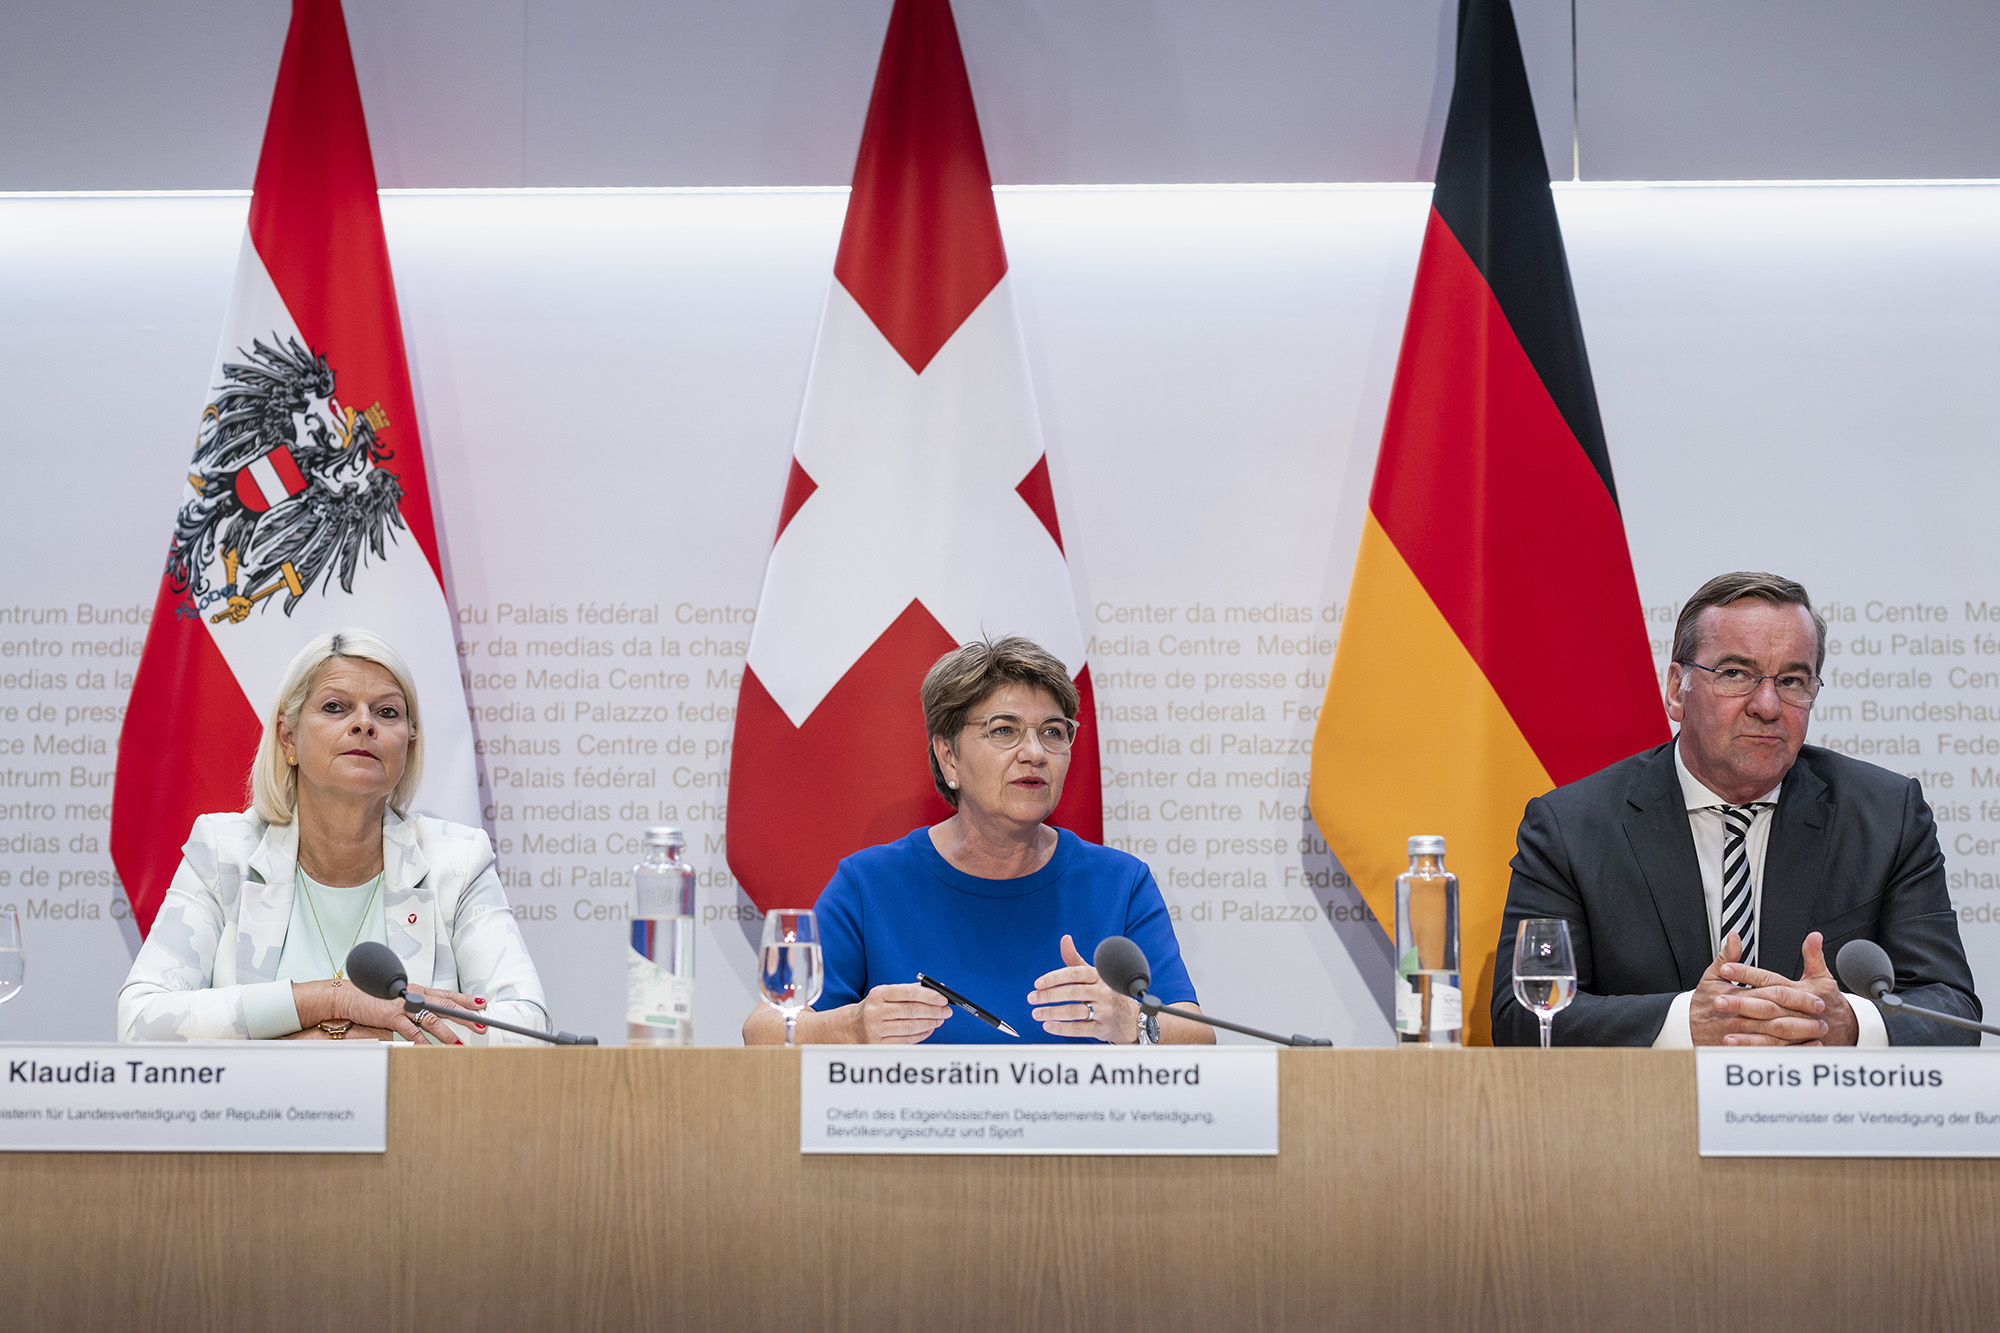 German Minister of Defence Boris Pistorius, right, Swiss Federal Councillor Viola Amherd, center, and Austrian Federal Minister of Defence, Klaudia Tanner attend D-A-CH (Germany, Austria and Switzerland) Defence Ministers meeting in Bern, Switzerland, on July 7.